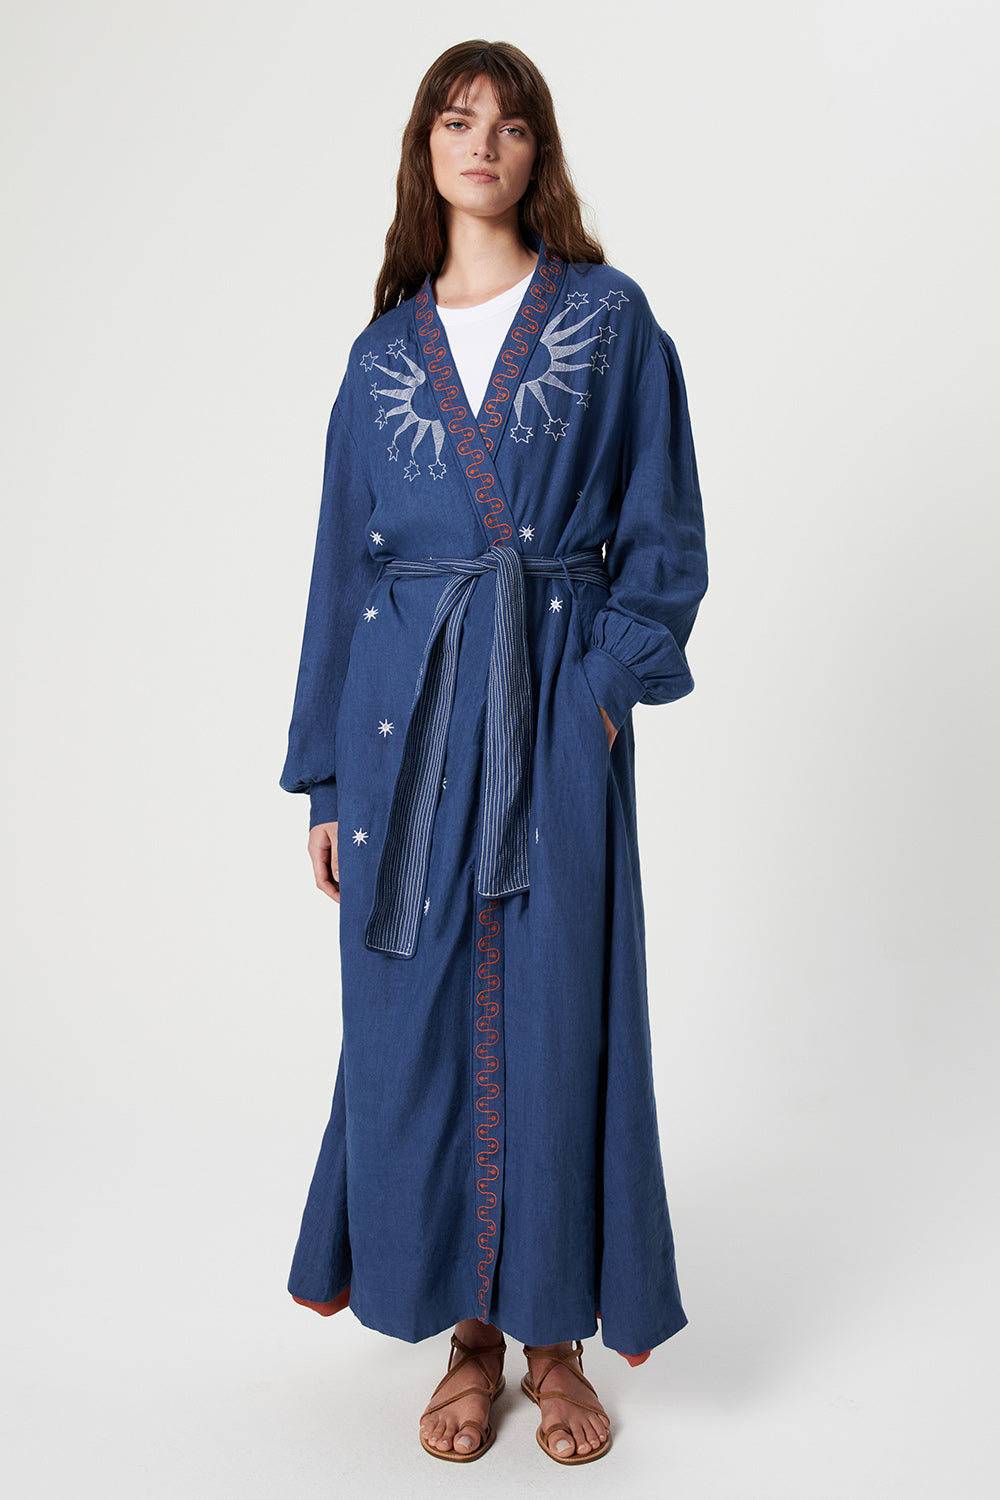 Daisy Embroidered Robe